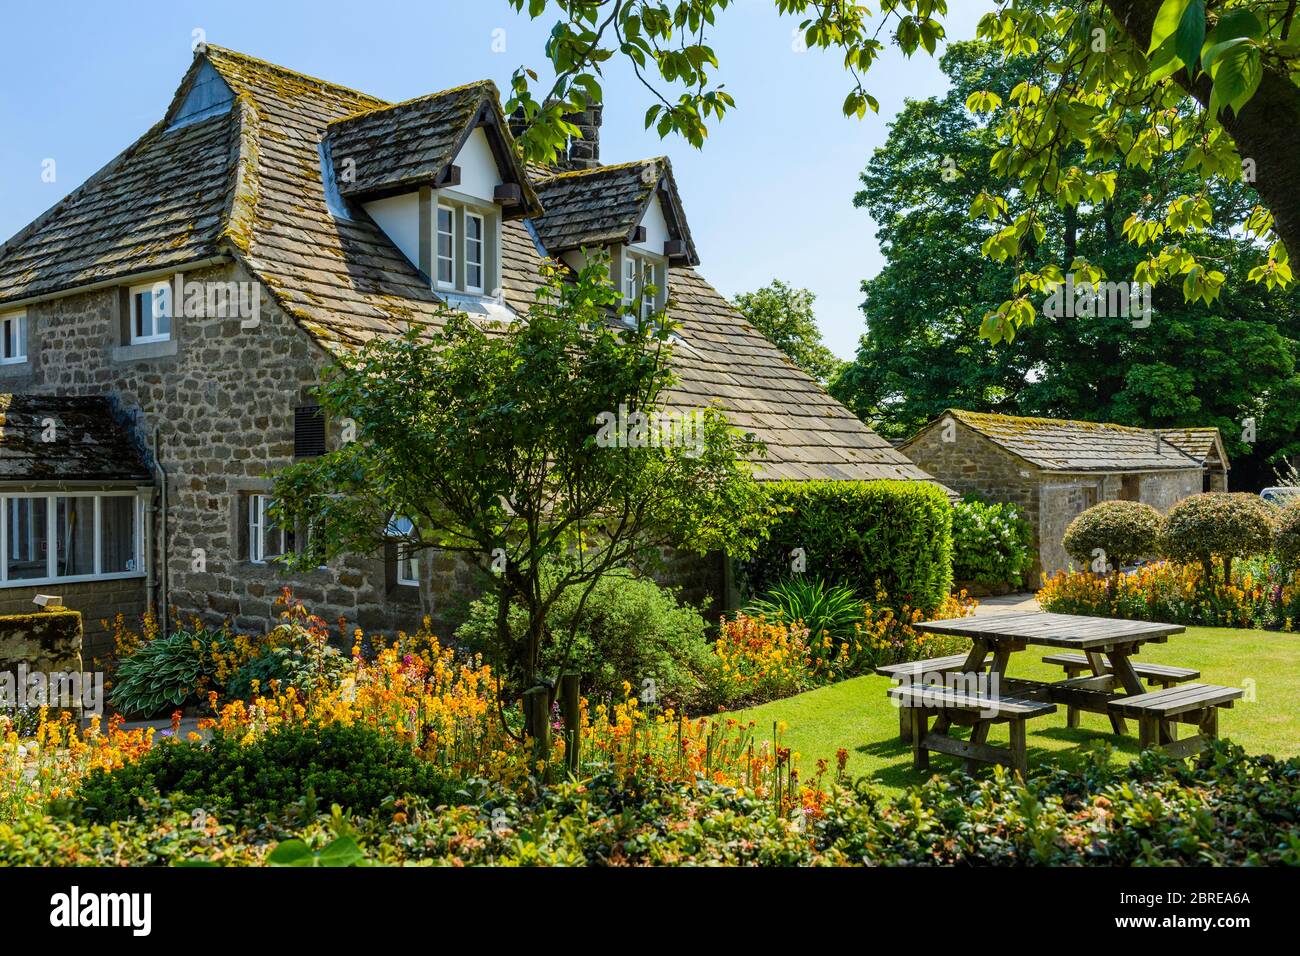 Exterior of quaint attractive cottage tea rooms cafe & country garden flowers, in scenic rural village - Bolton Abbey, Yorkshire Dales, England, UK. Stock Photo